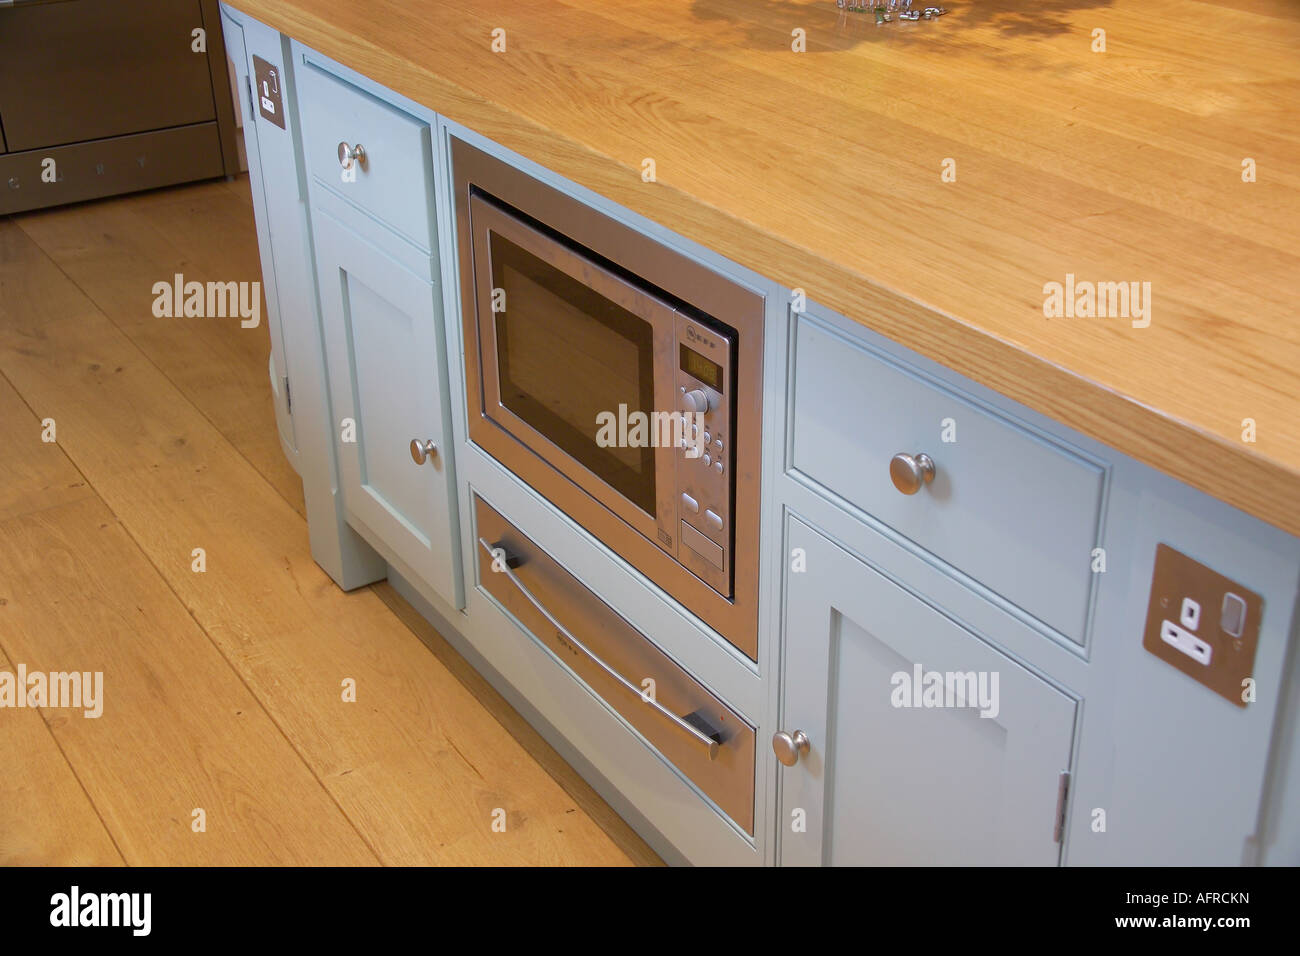 Close Up Of Kitchen Unit With Built In Microwave Oven And Warming